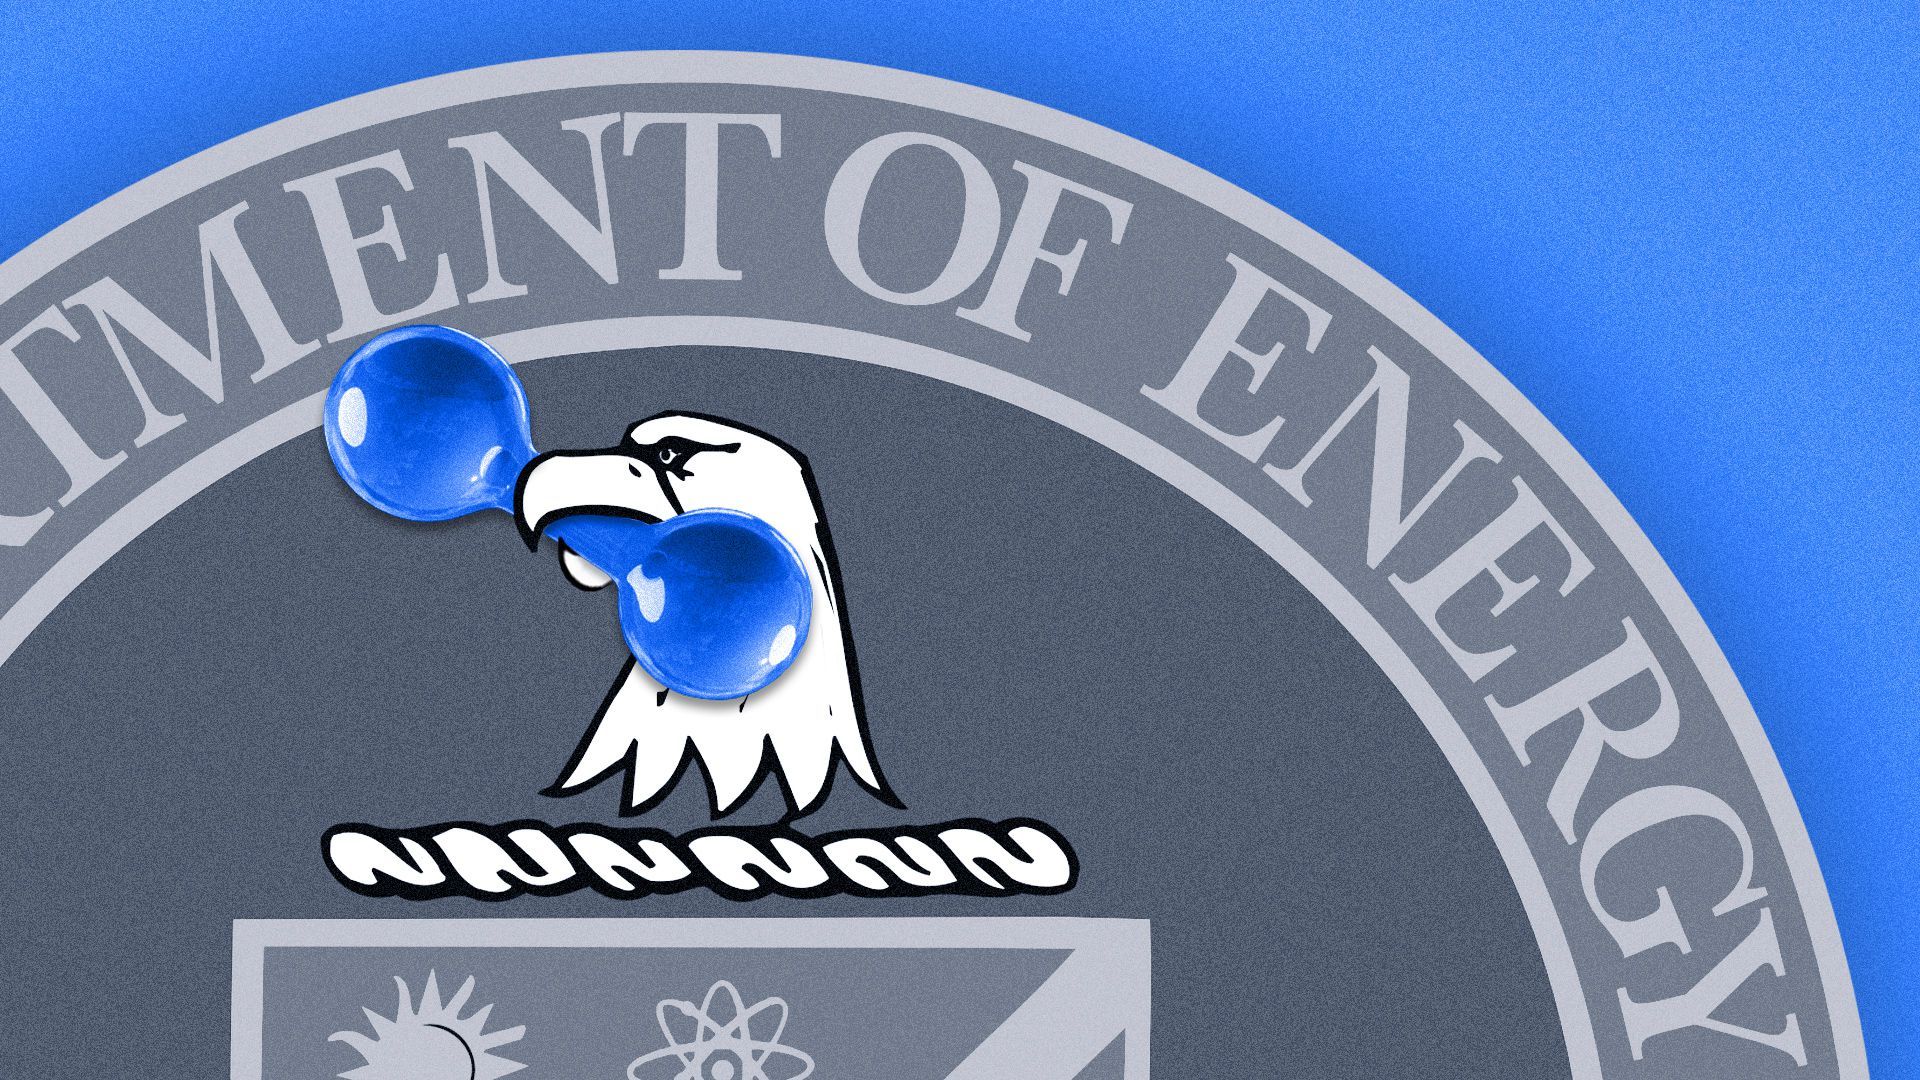 Illustration of the eagle on the U.S. Department of Energy seal holding a hydrogen molecule in its beak.